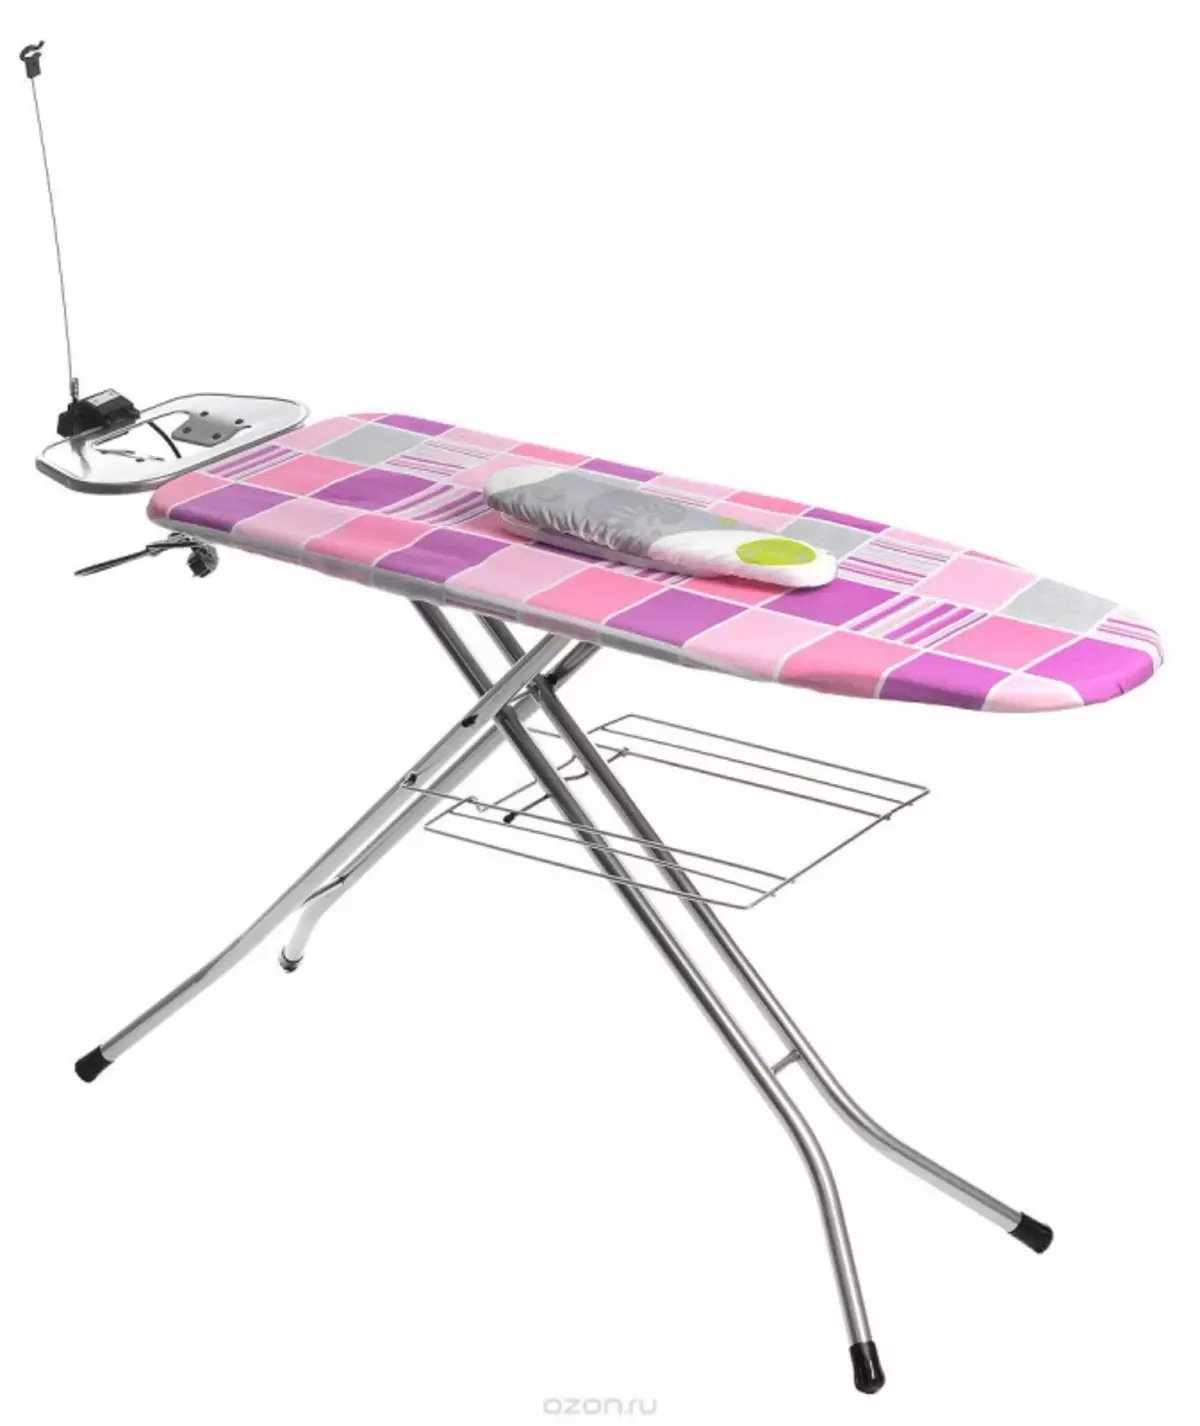 Ironing board for steam generator: rating of the best products, active board with stand for iron. How to choose? Reviews 11197_28